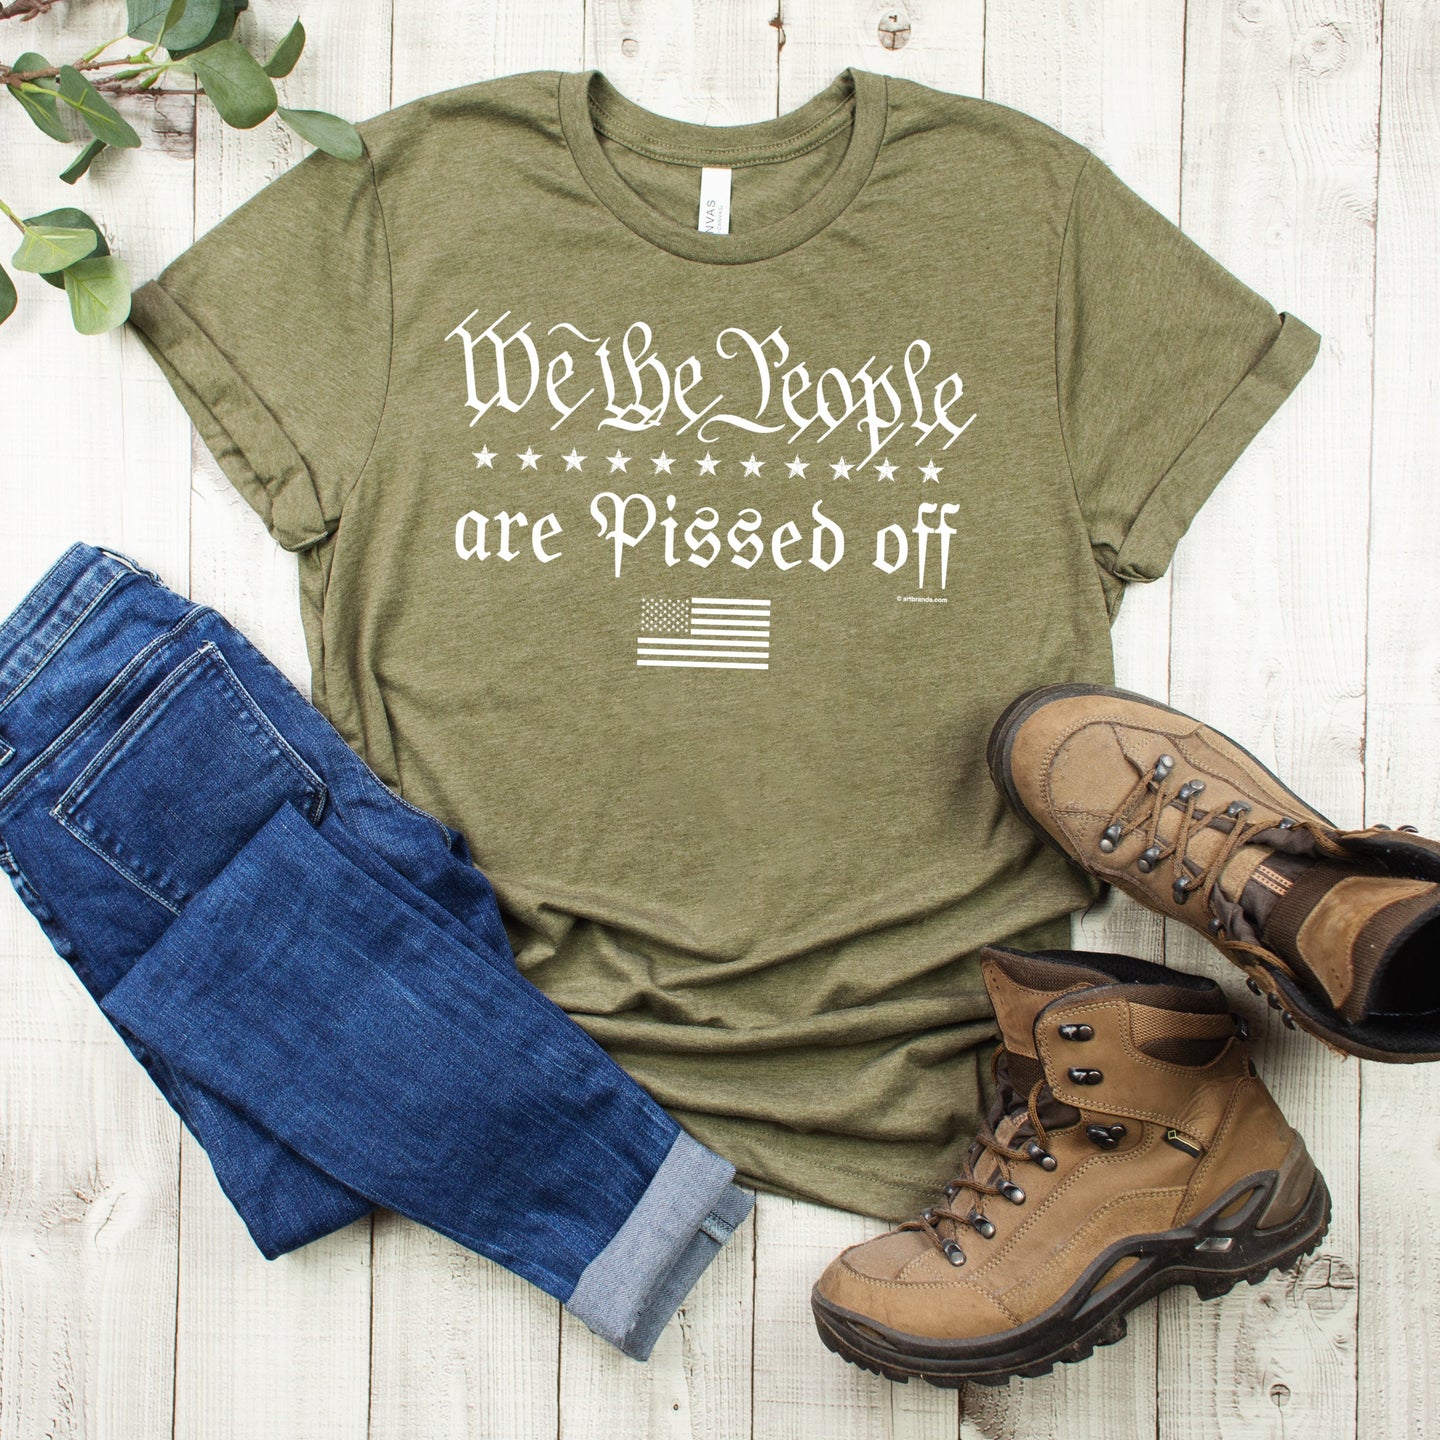 We the People are Pissed off T-shirt